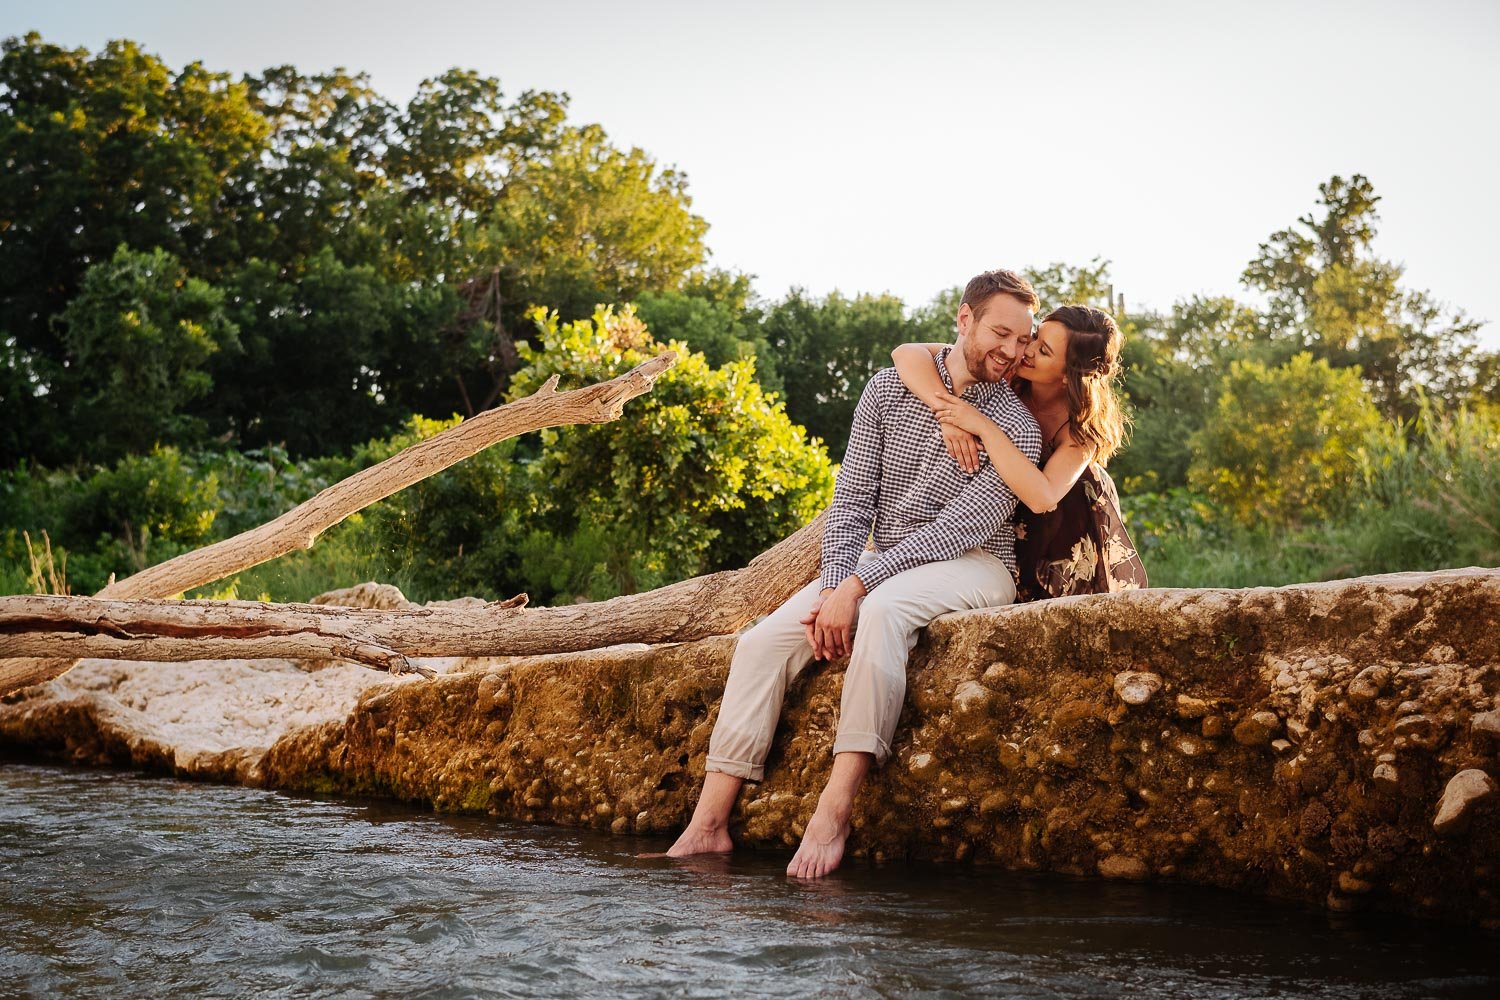 Jordan + Colters engagement session at Blanco River sunset in San Marcos and Blanco River Summer 2019 -Philip Thomas Photography